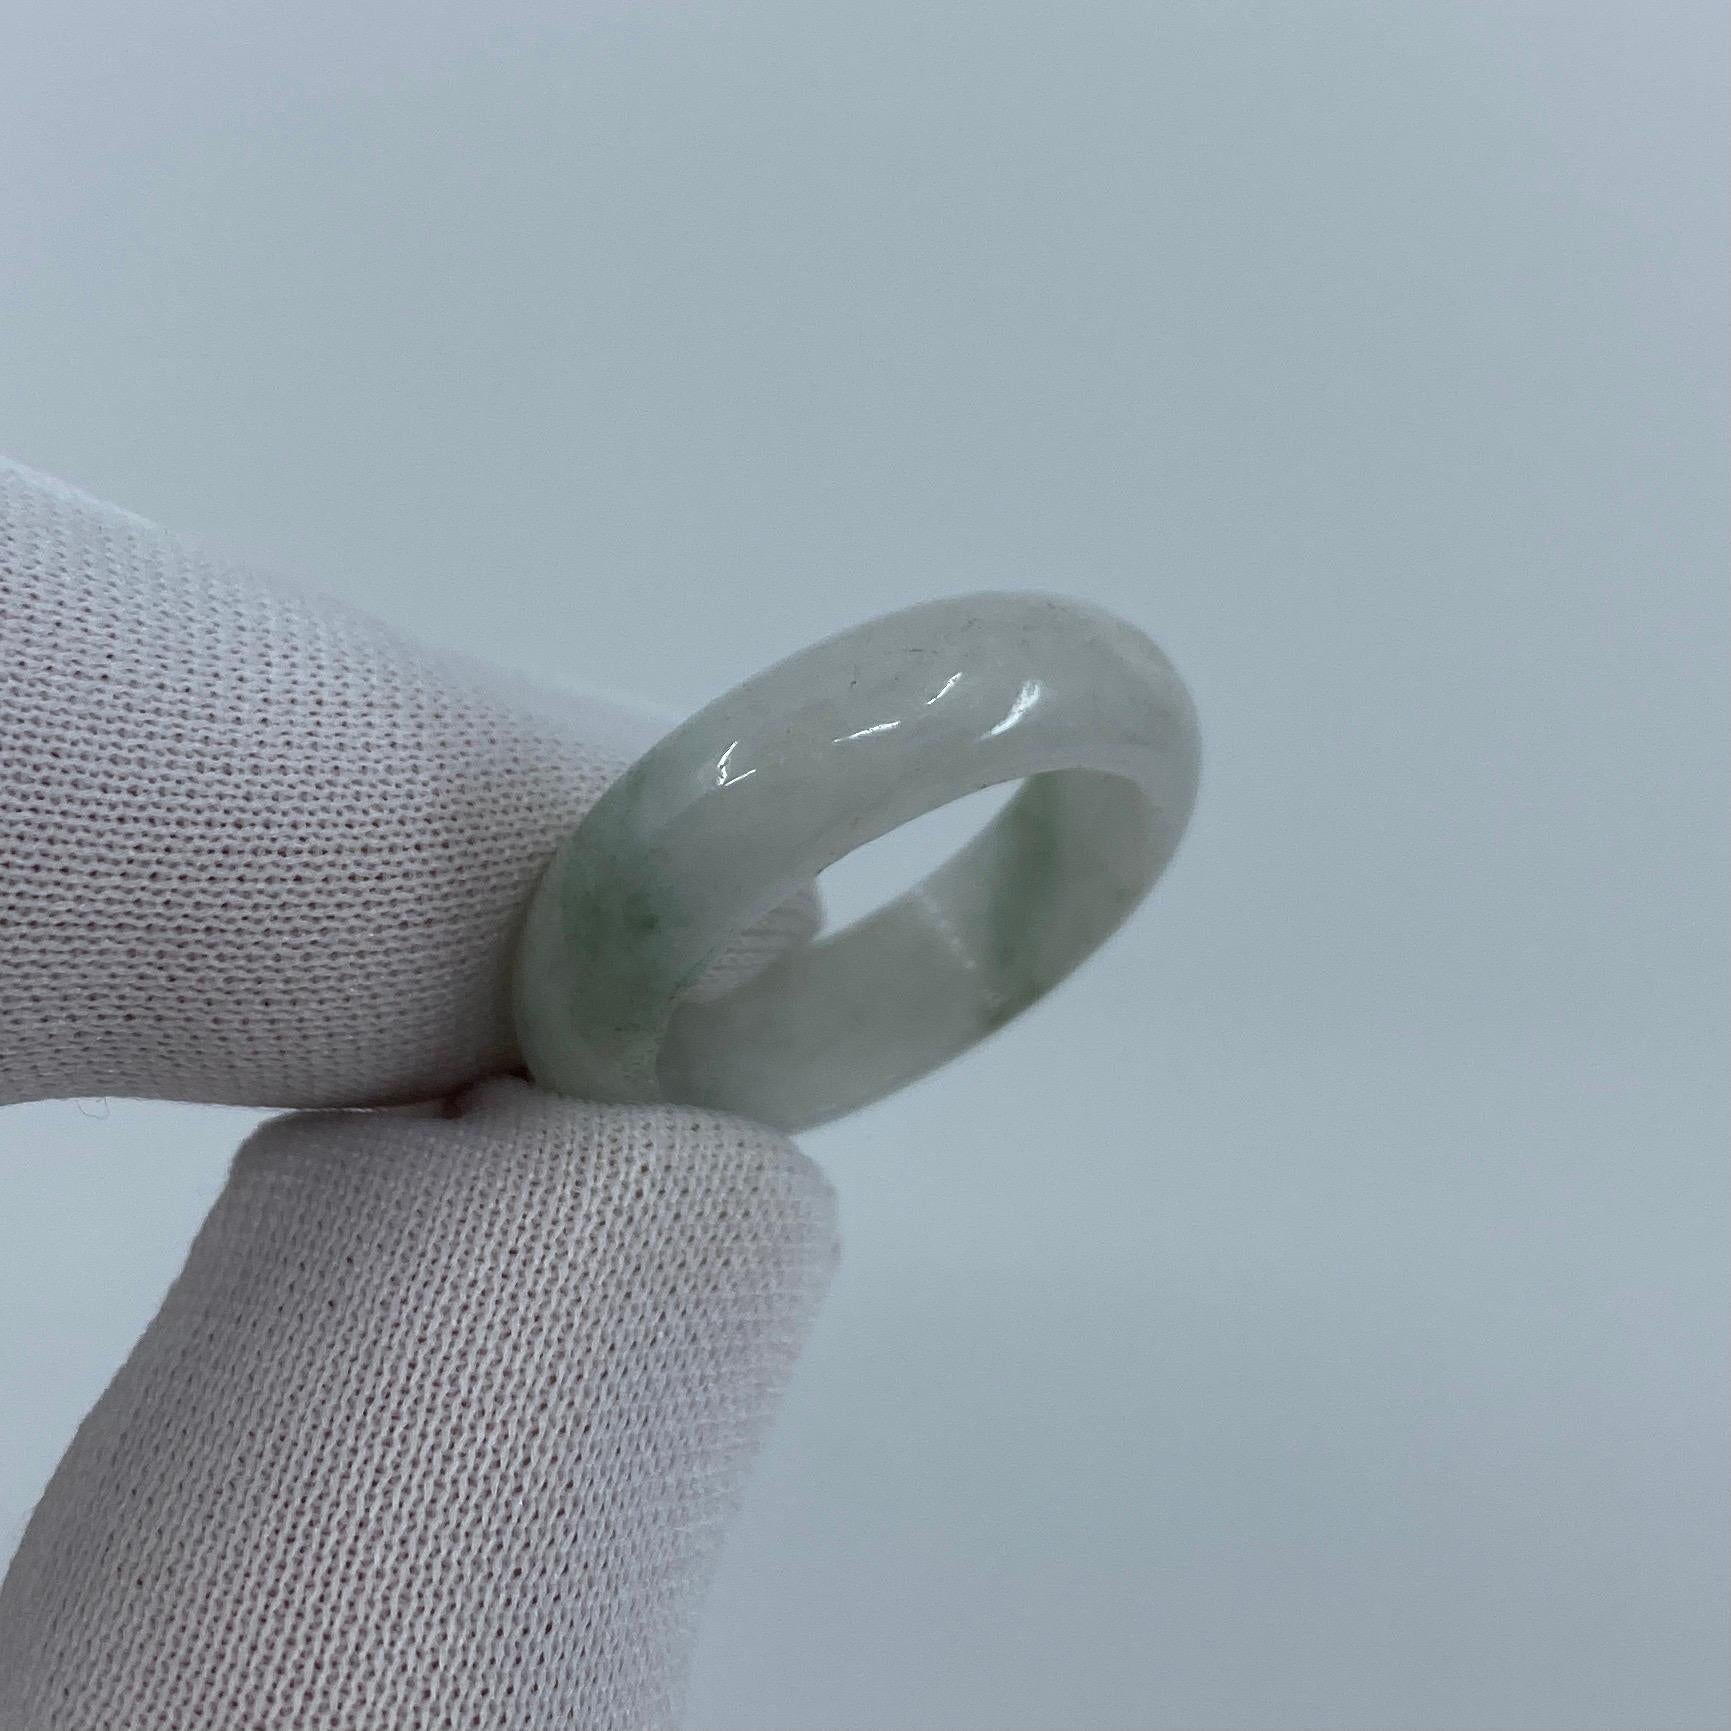 Natural Light Mottled Green Jadeite Jade Ring.

15.70ct with a beautiful mottled light green colour with an excellent polish and lustre with no cracks or chips.

This is a treated jadeite ring, as to be expected of such a large piece in this price